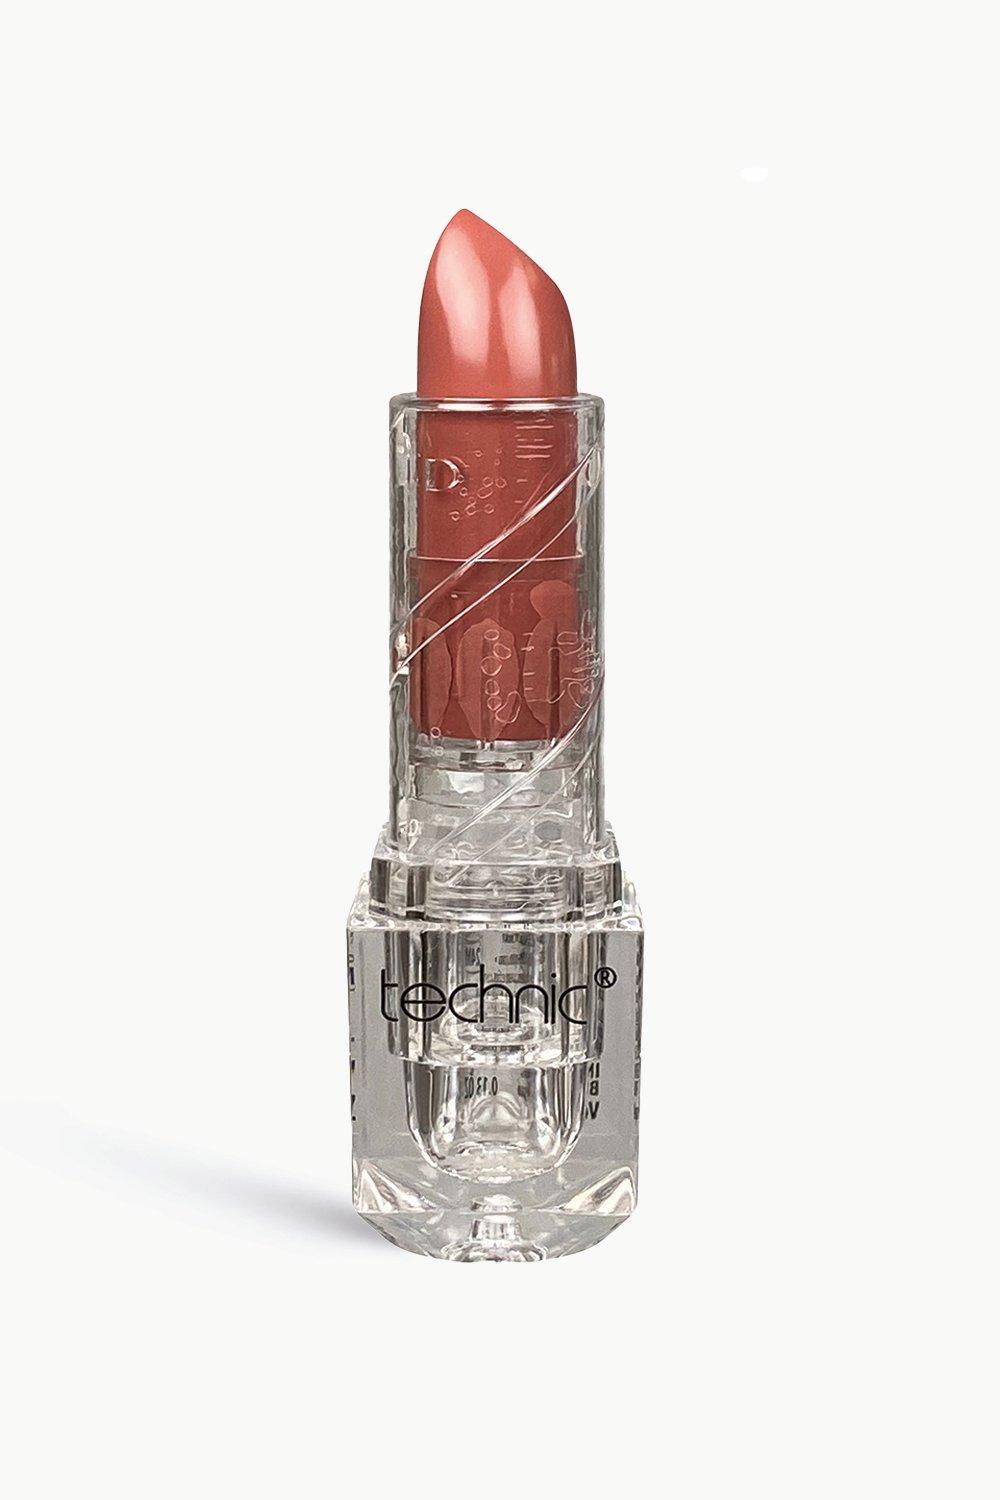 Technic Nude Edition Matte Lipstick - In The Buff, Pink